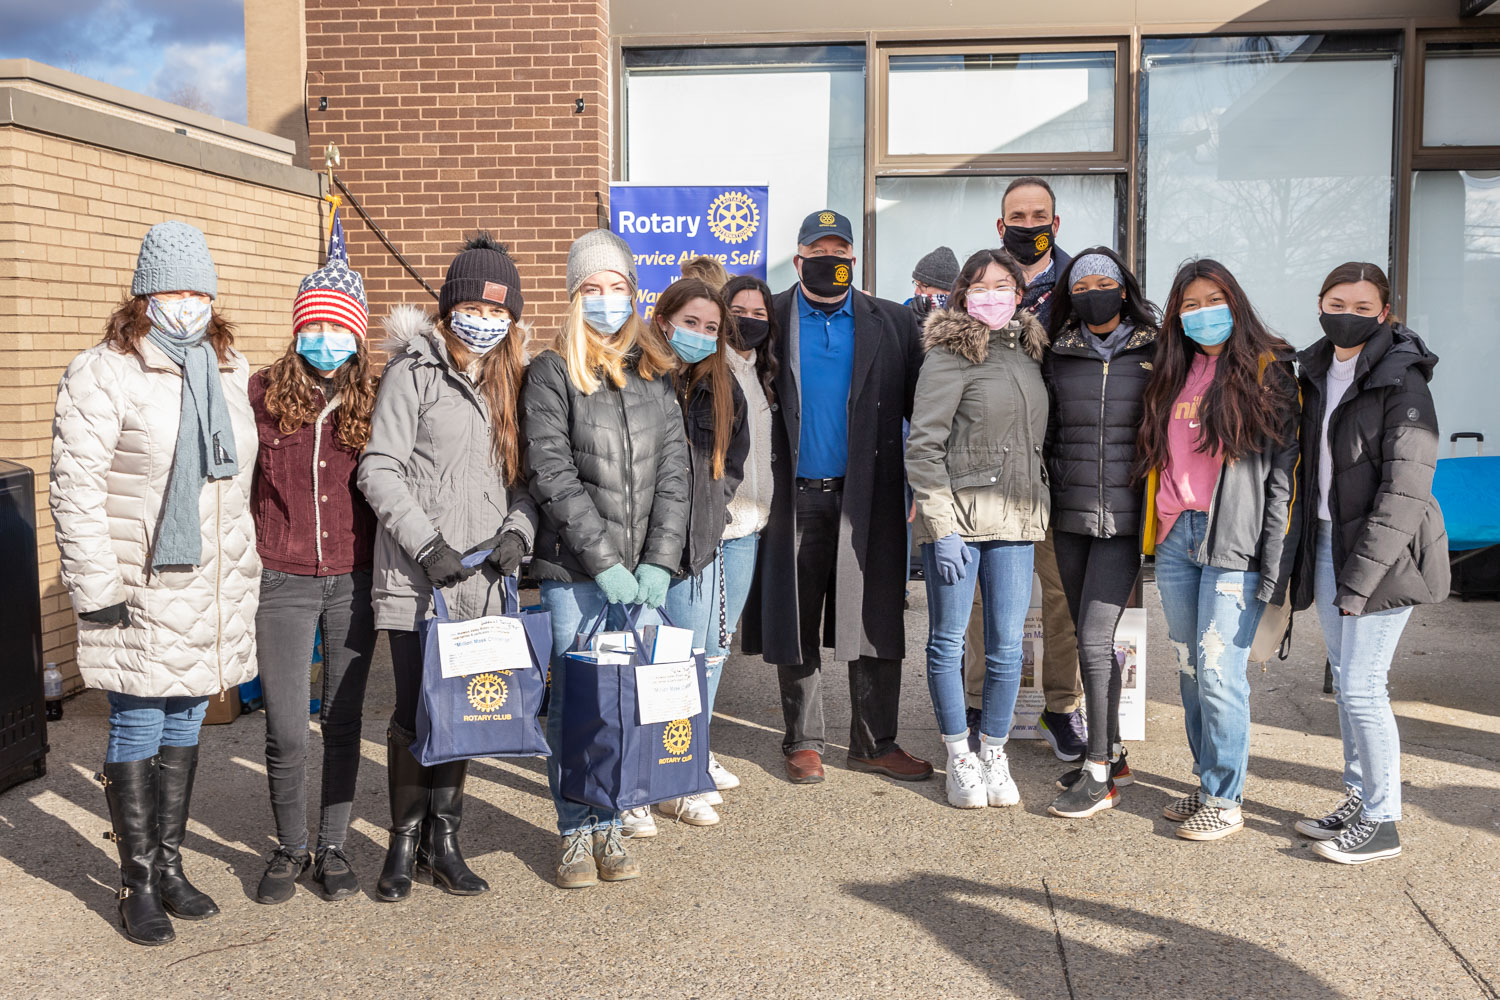 Members of the Warwick Valley High School’s Interact Club volunteered to help distribute more than 7,000 masks with the Warwick Valley Rotary Club as part of the Rotary’s Million Mask Challenge Tour on Jan. 23, at St. Anthony Community Hospital in Warwick. 